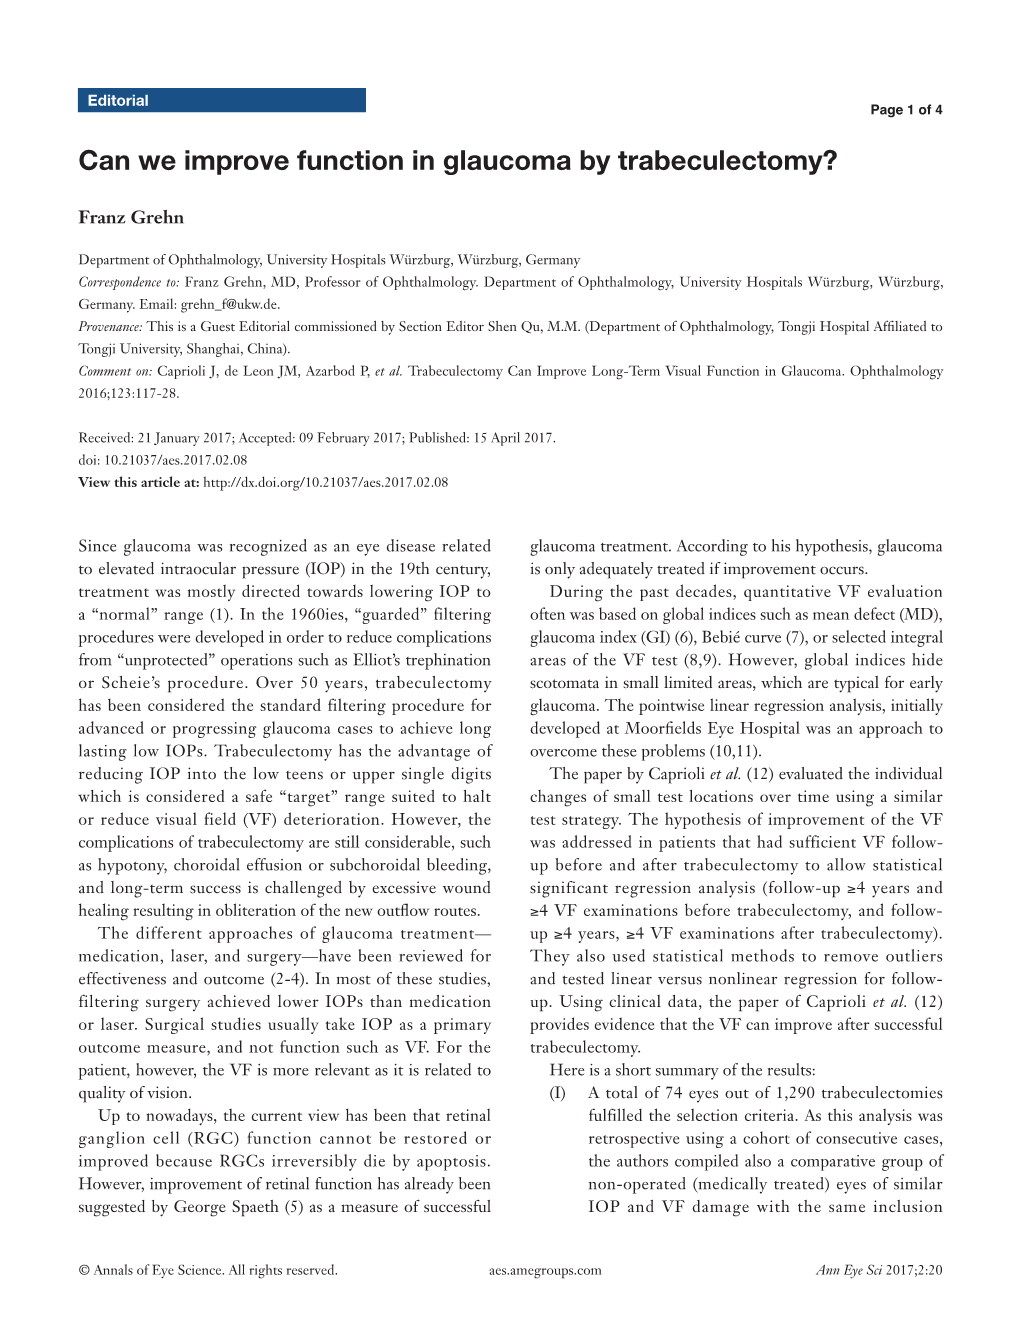 Can We Improve Function in Glaucoma by Trabeculectomy?